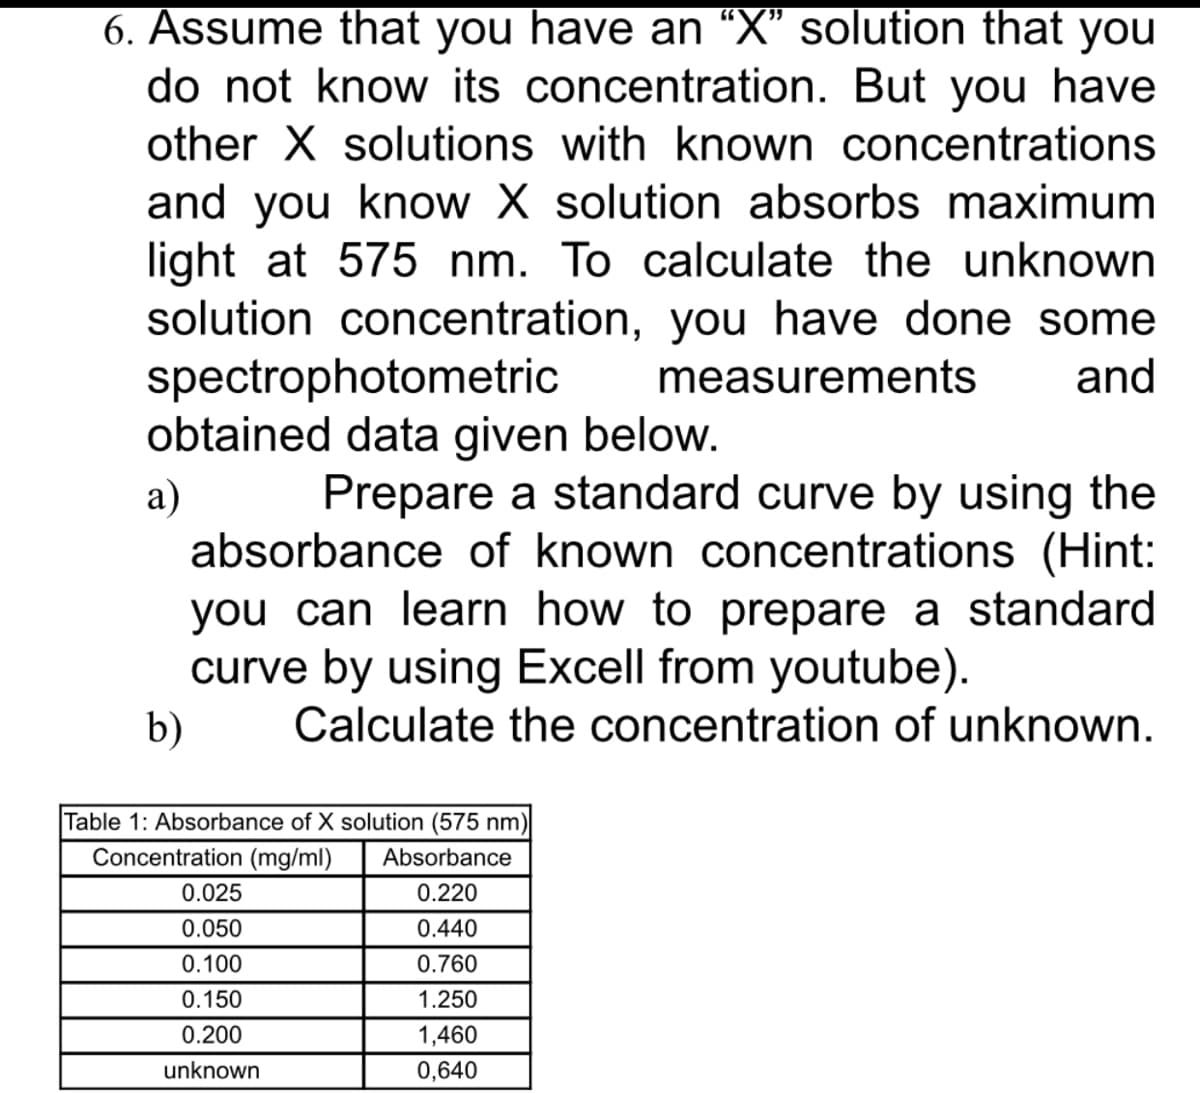 6. Assume that you have an “X" solution that you
do not know its concentration. But you have
other X solutions with known concentrations
and you know X solution absorbs maximum
light at 575 nm. To calculate the unknown
solution concentration, you have done some
spectrophotometric
obtained data given below.
measurements
and
Prepare a standard curve by using the
a)
absorbance of known concentrations (Hint:
you can learn how to prepare a standard
curve by using Excell from youtube).
Calculate the concentration of unknown.
b)
Table 1: Absorbance of X solution (575 nm)
Concentration (mg/ml)
Absorbance
0.025
0.220
0.050
0.440
0.100
0.760
0.150
1.250
0.200
1,460
unknown
0,640
